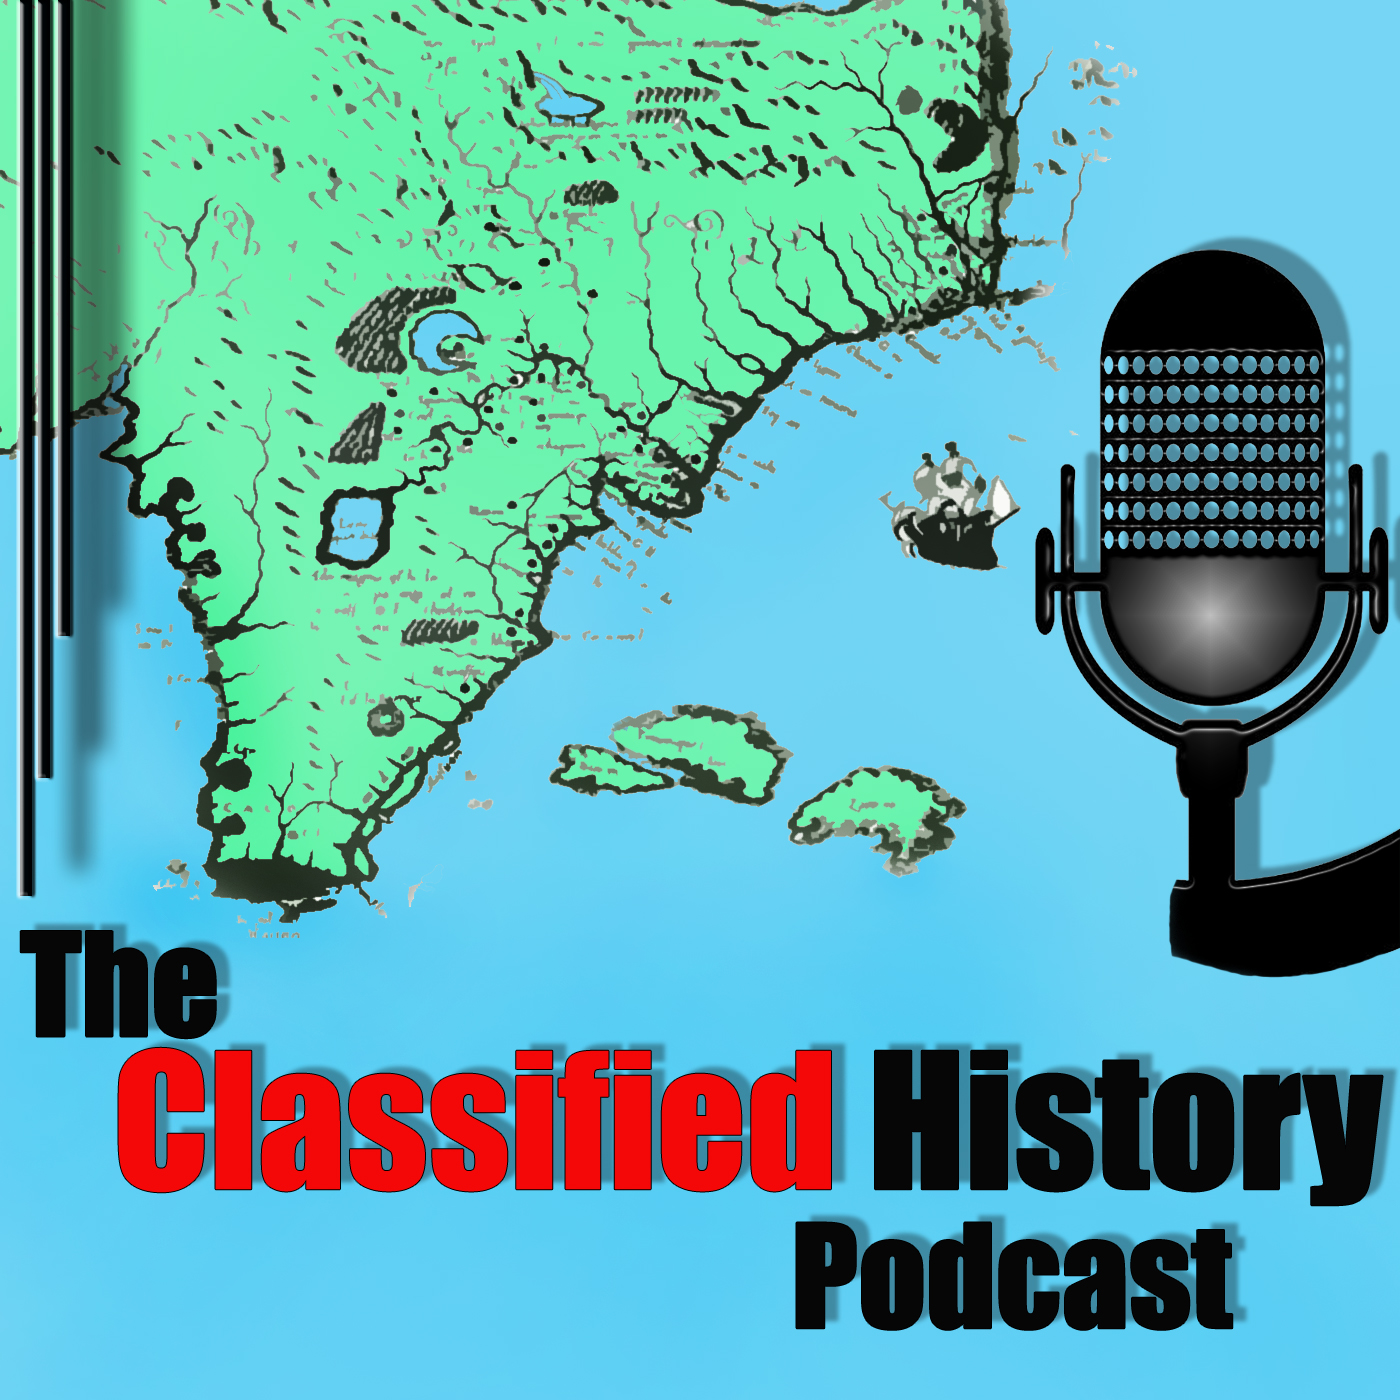 Alachua County's River Styx: The Classified History Podcast